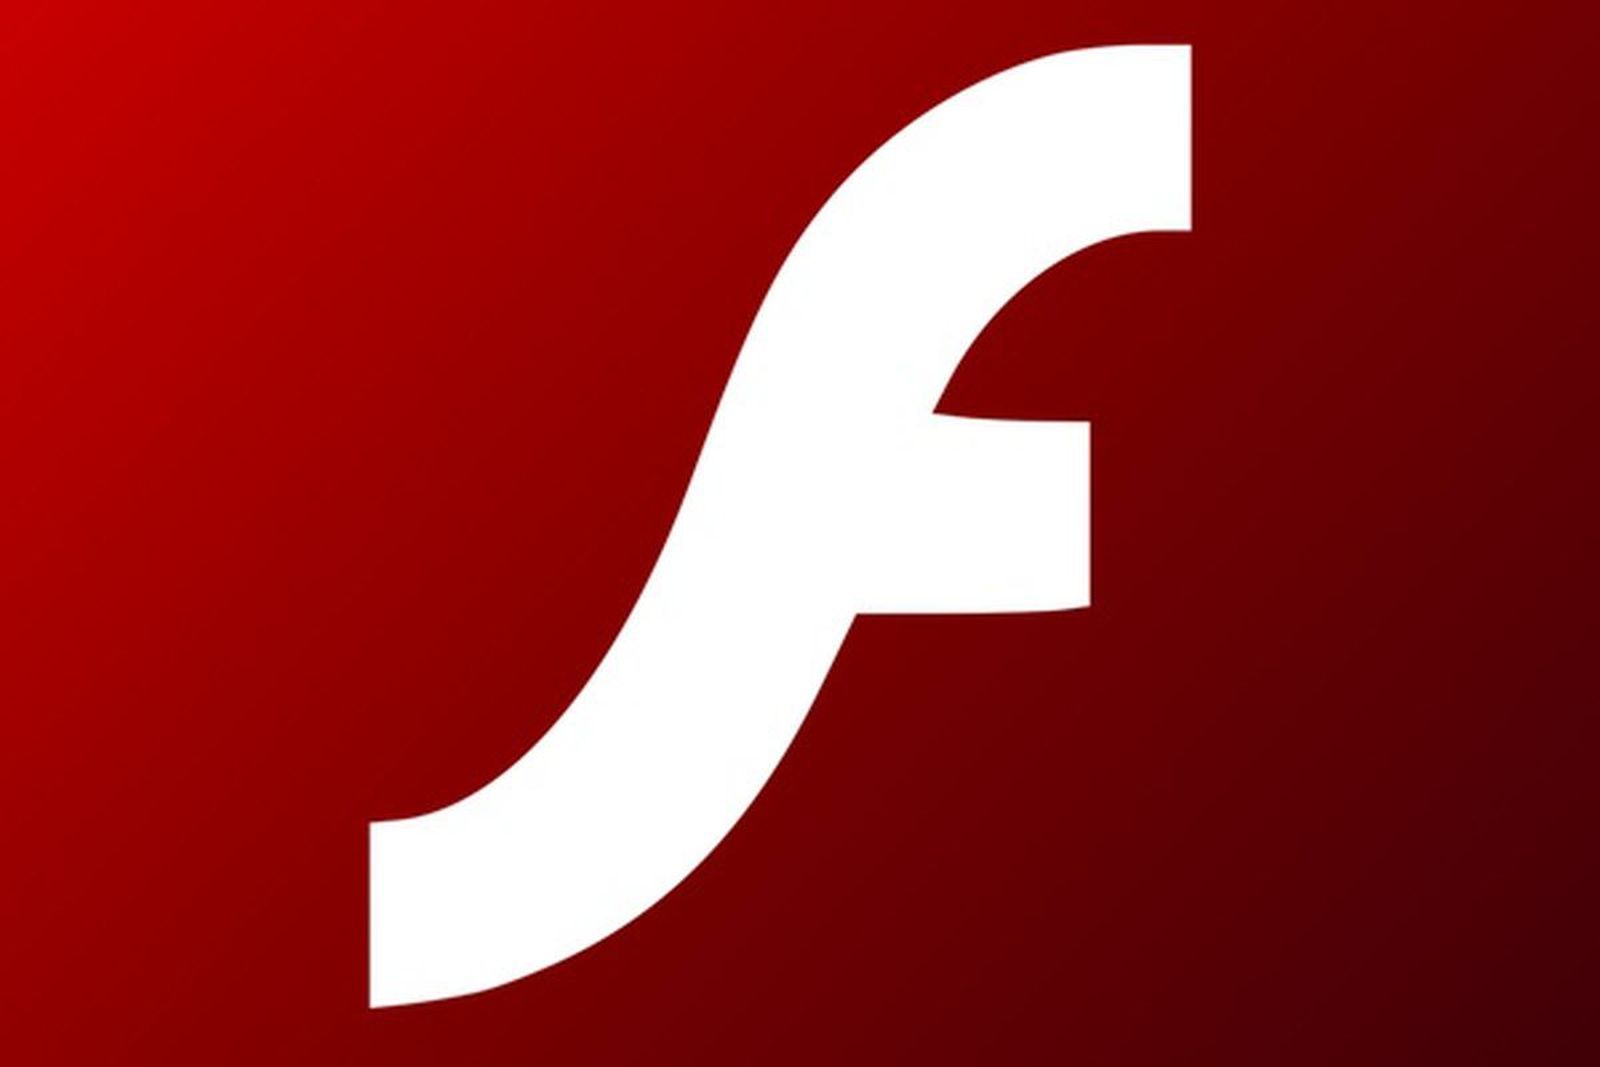 Adobe officially stops Flash support, recommends immediate uninstallation